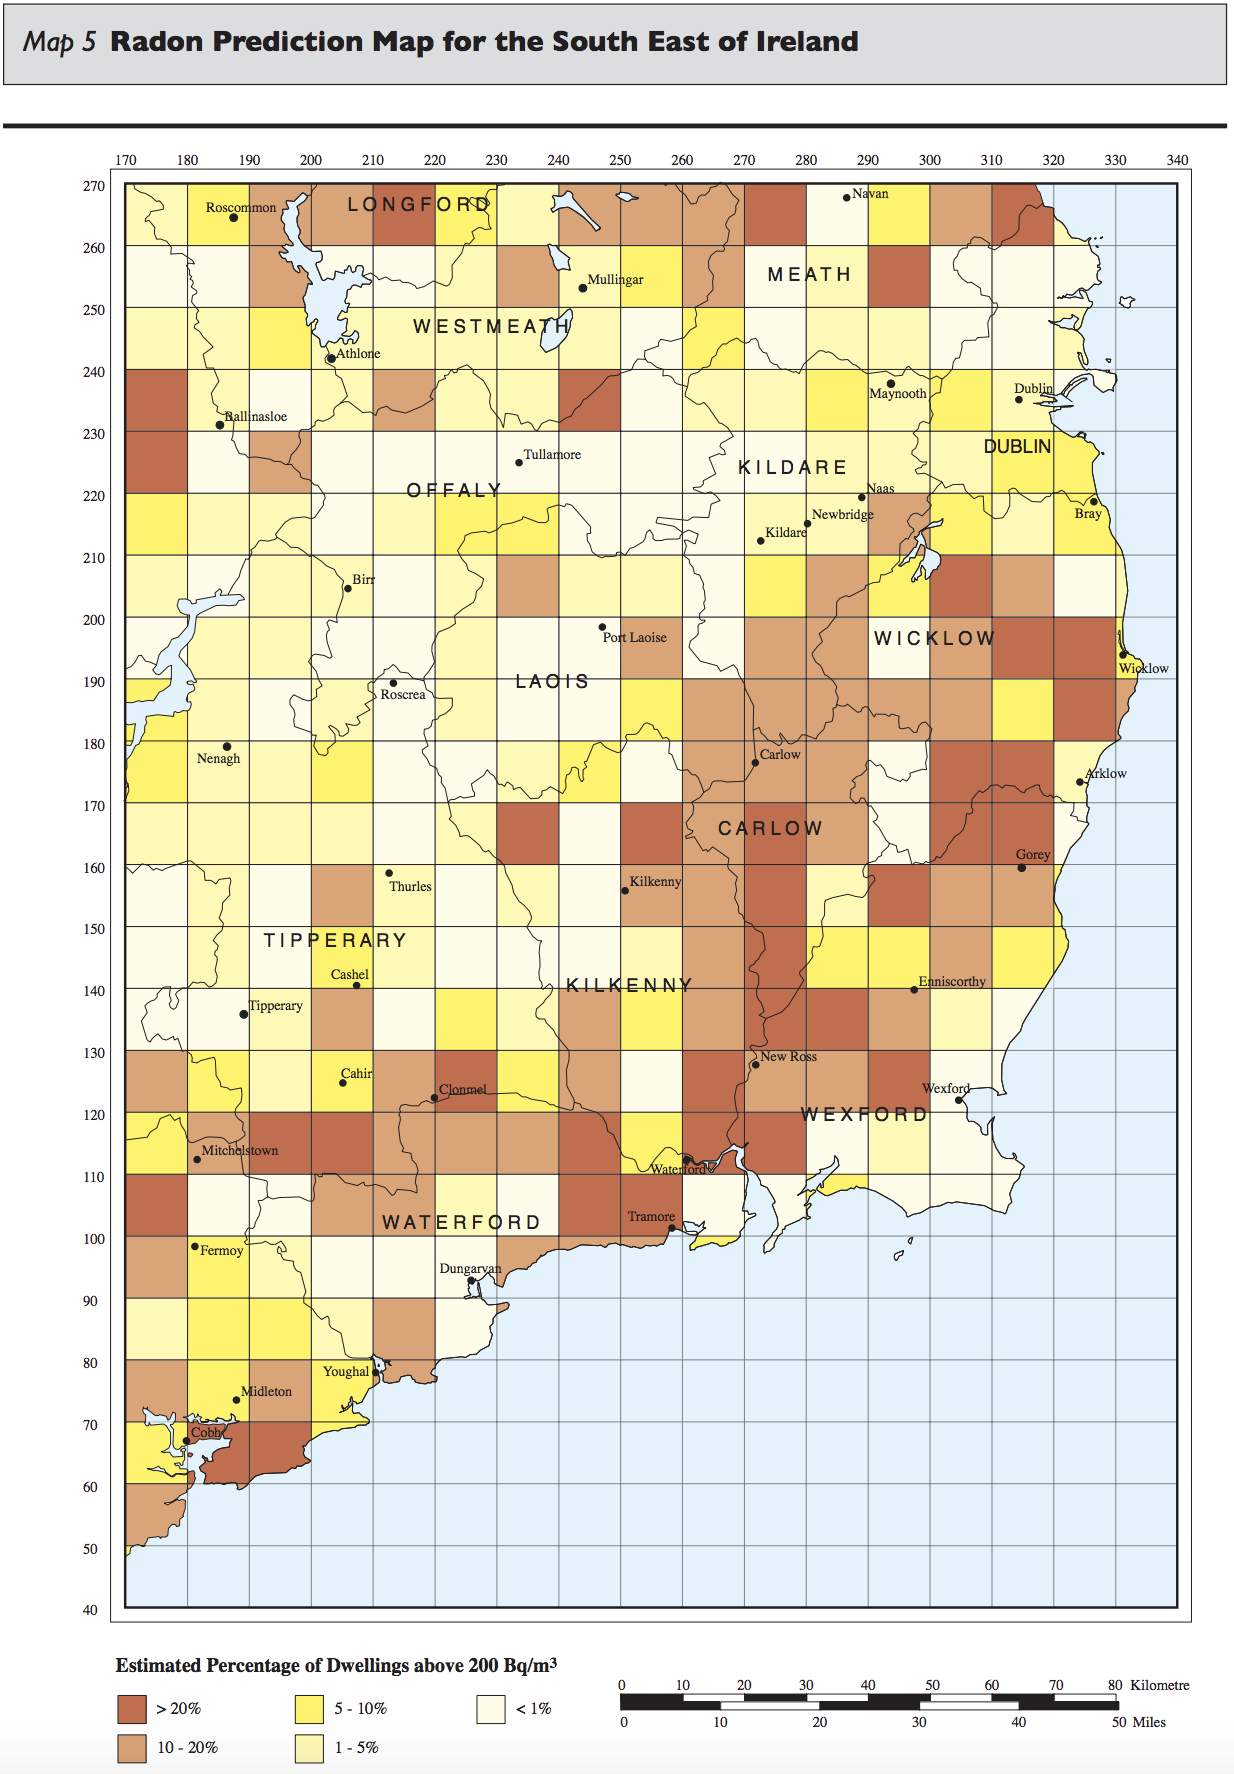 Diagram HC7 - Radon prediction map for the South East of Ireland - Extract from TGD C